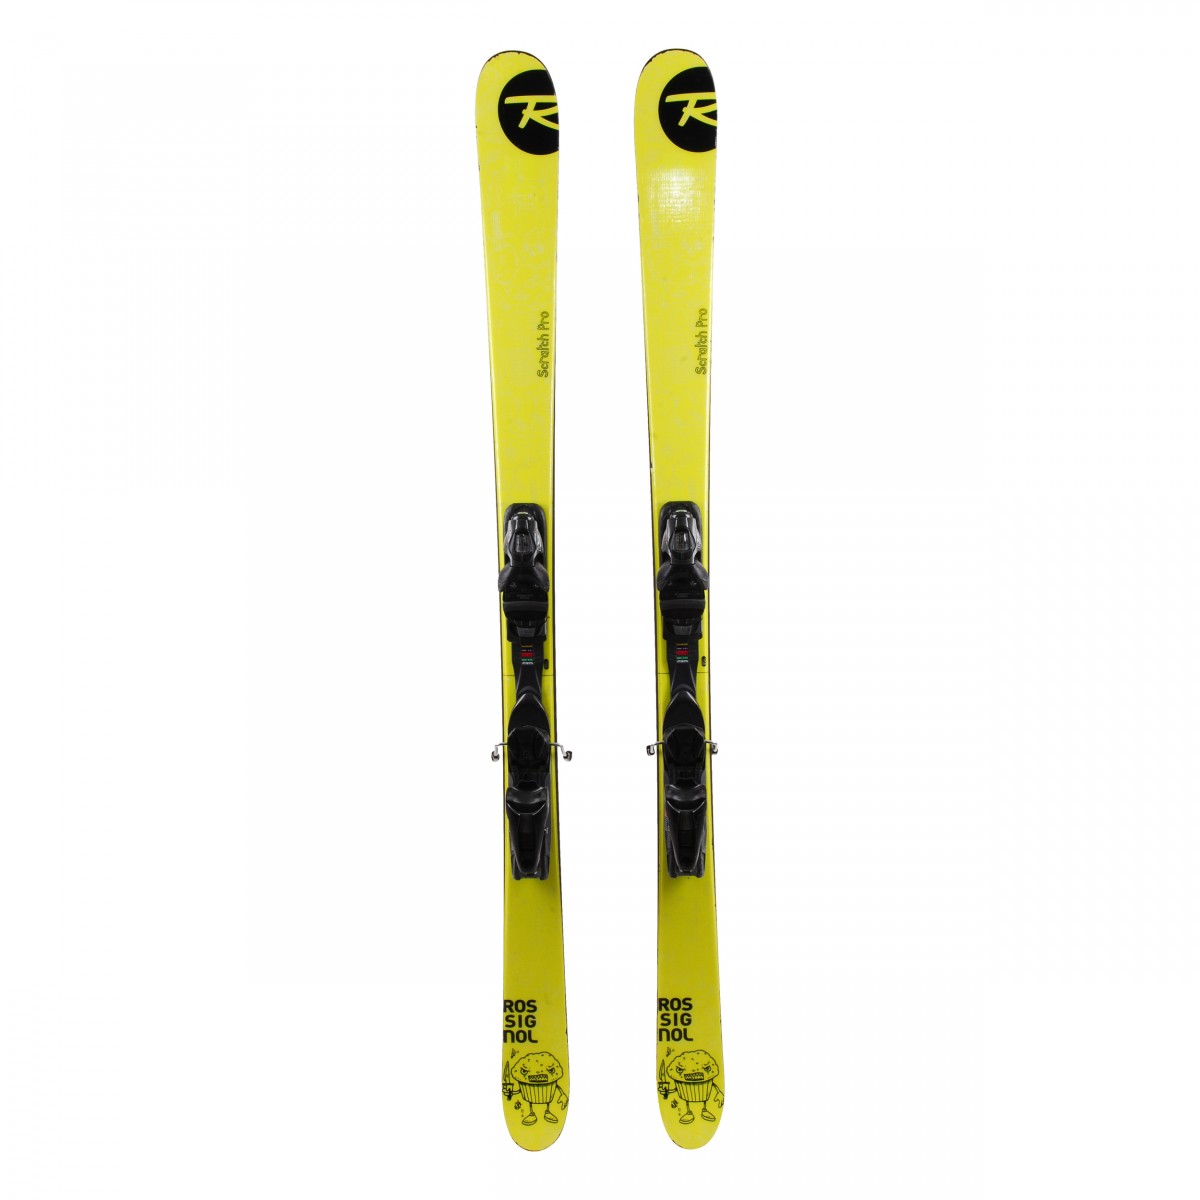 ROSSIGNOL SCRATCH SKIS SIZE 180 CM WITH SALOMON BINDINGS